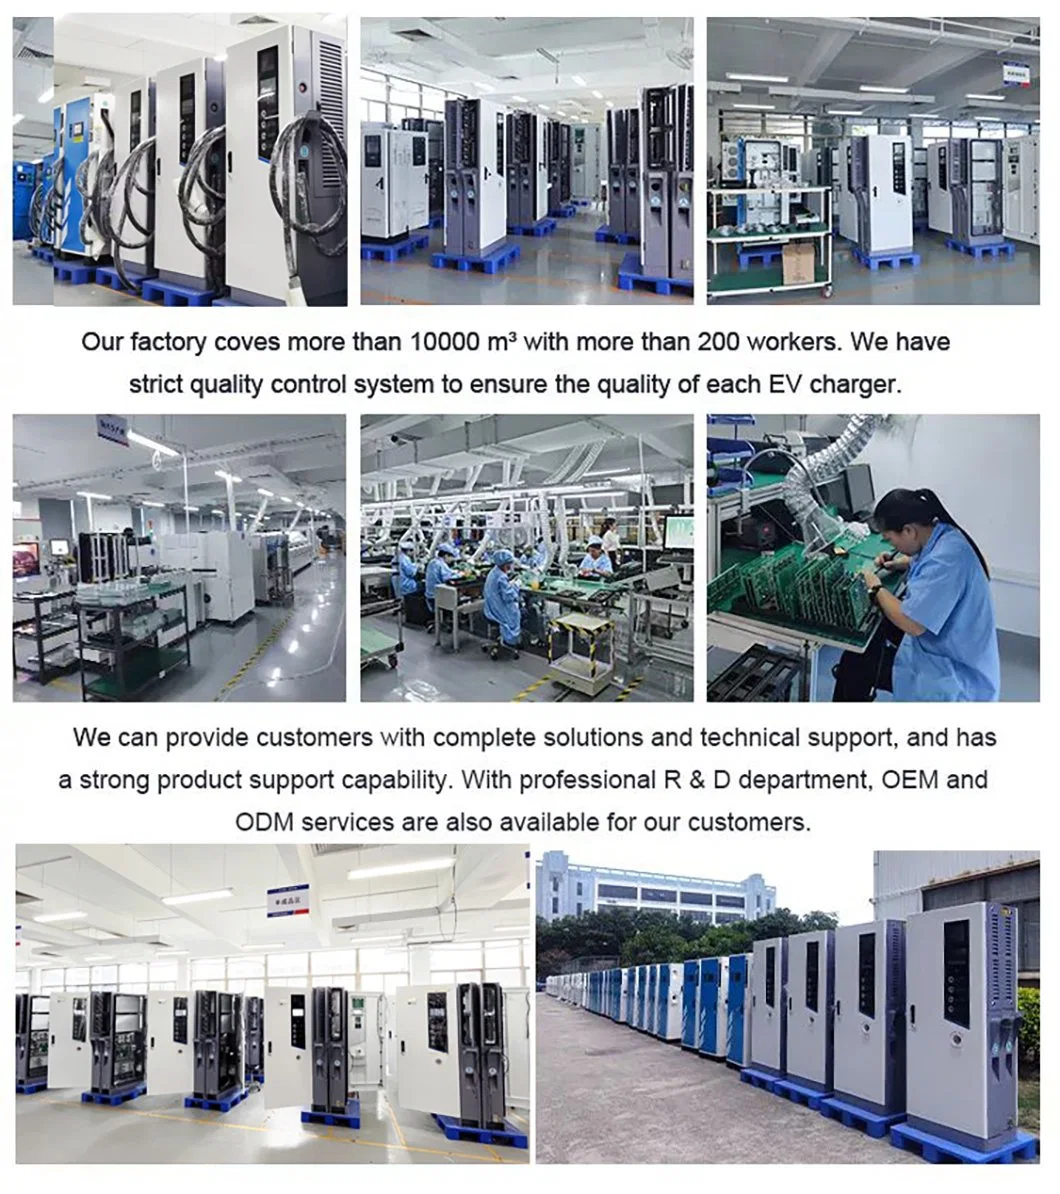 Ocpp 1.6j Us Standard High Power Electric Car Charger 60kw 80kw 100kw 120kw CCS Chademo Gbt Public DC EV Charging Station Companies